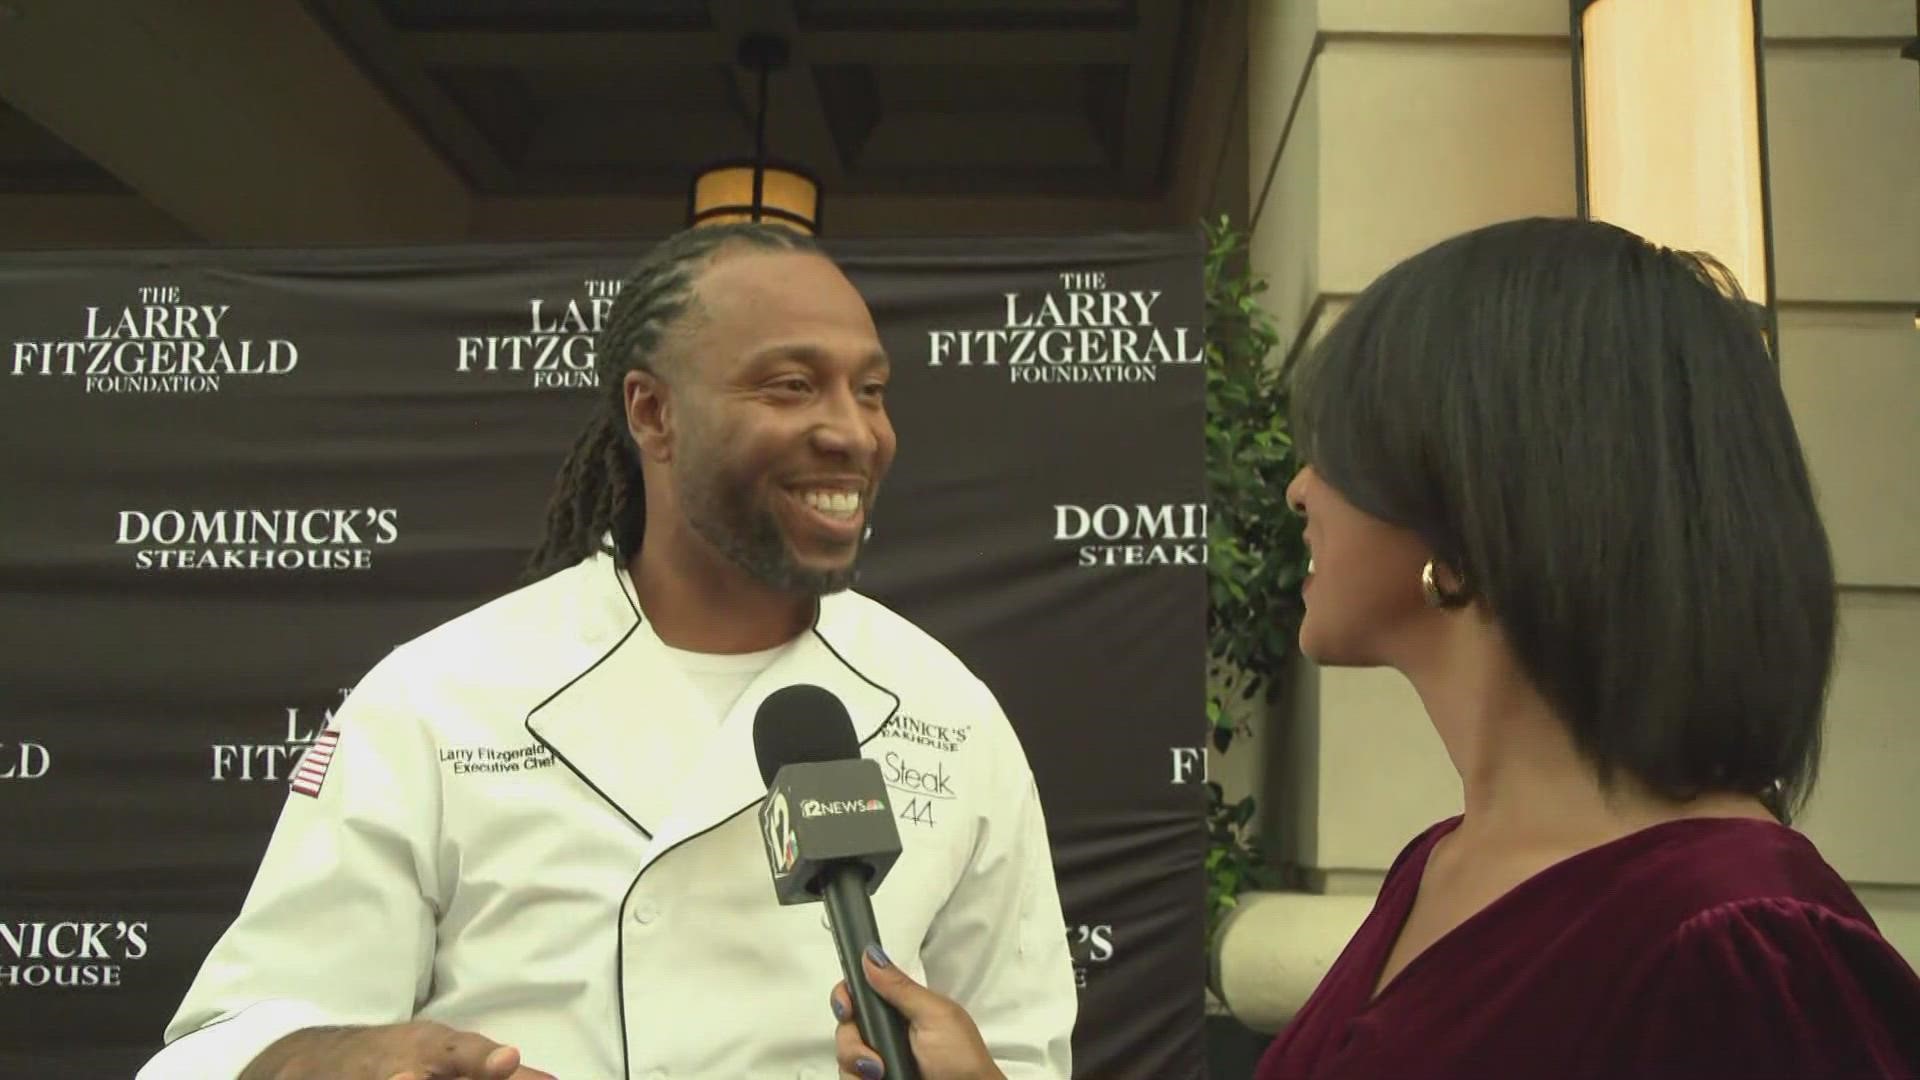 A big event that will have a lot of impact on Valley kids is taking place on Tuesday night. The annual Larry Fitzgerald Supper Club has big plans for the community.